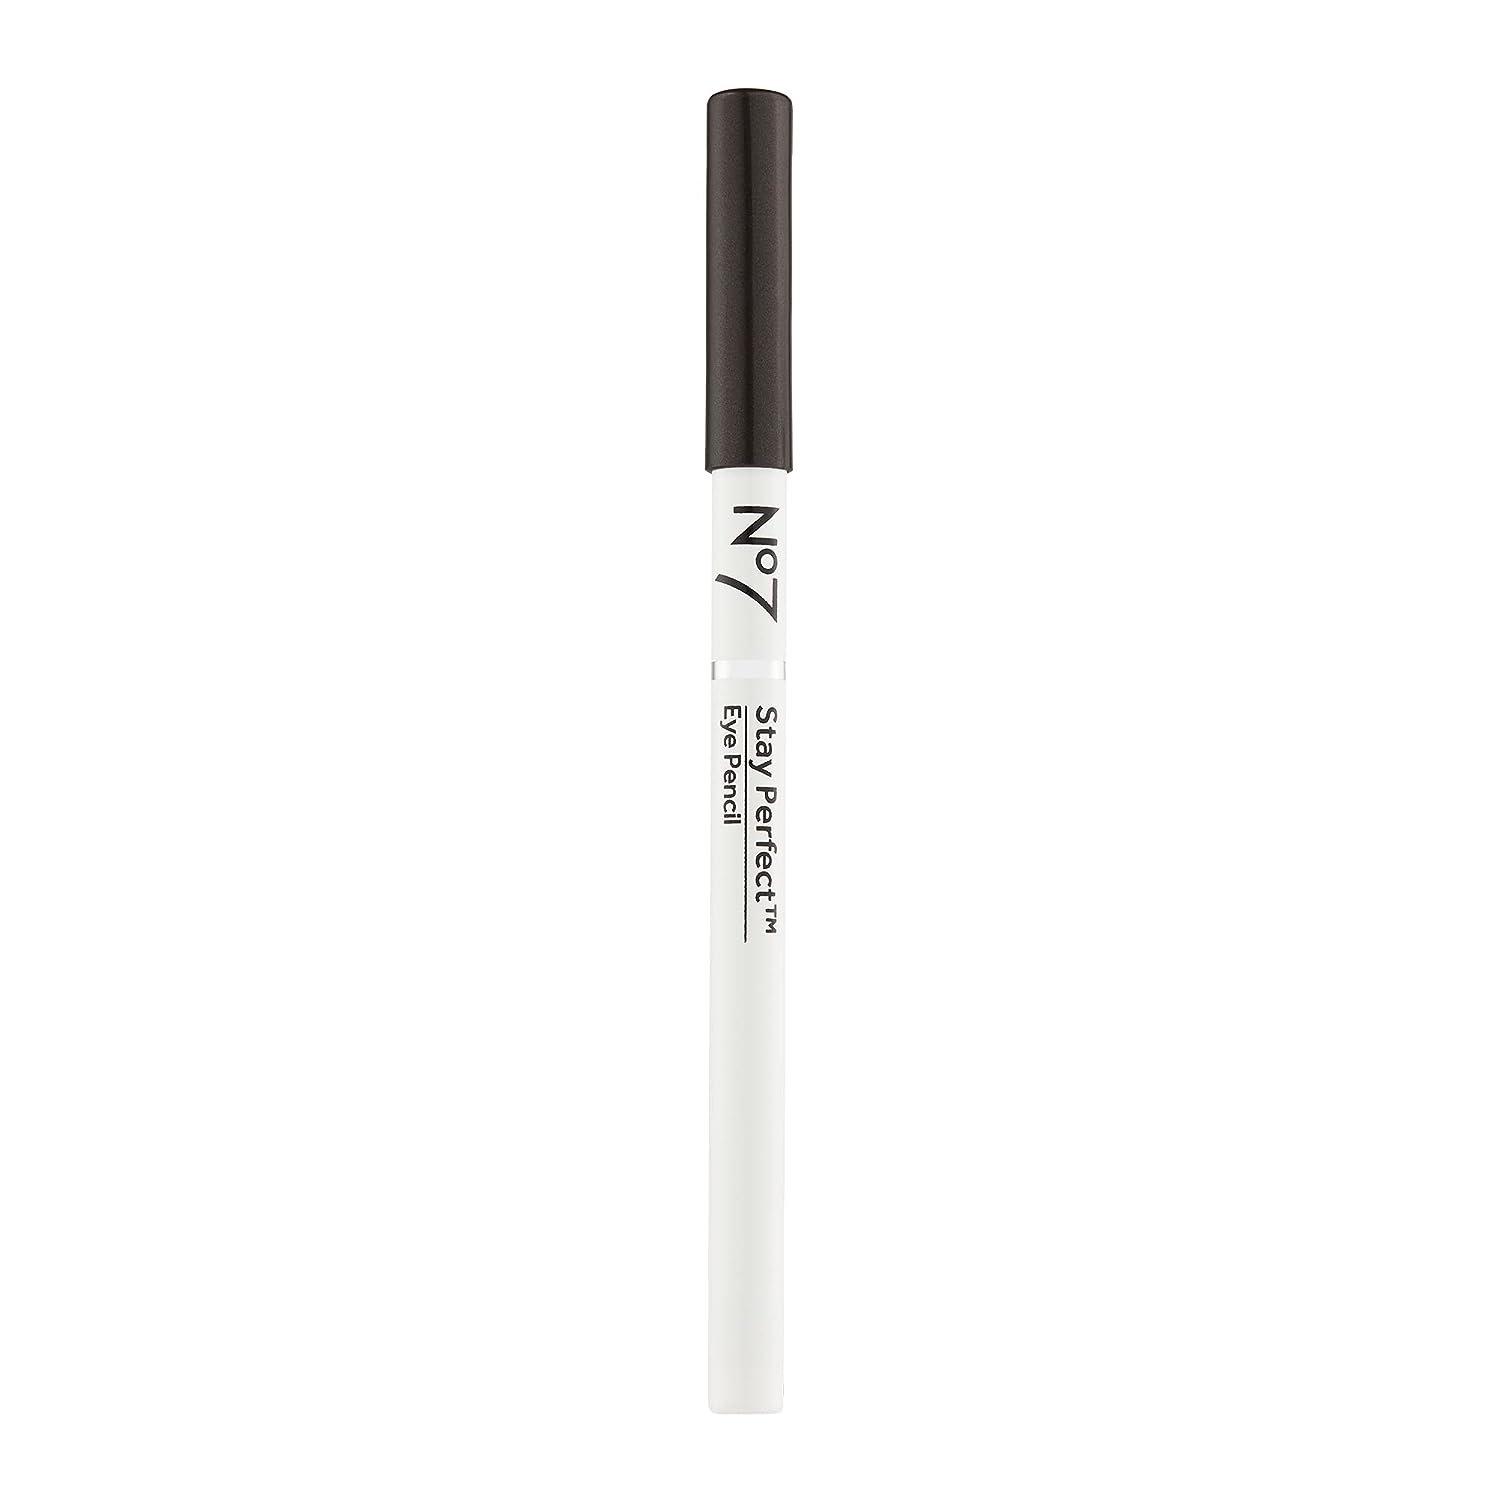 No7 Stay Perfect Amazing Eye Pencil - Black - Precision Tip Pencil Eyeliner for Silky, Effortlessly Smooth Texture - Up to 12 Hrs of Long Wearing, Waterproof Pigment (1g)